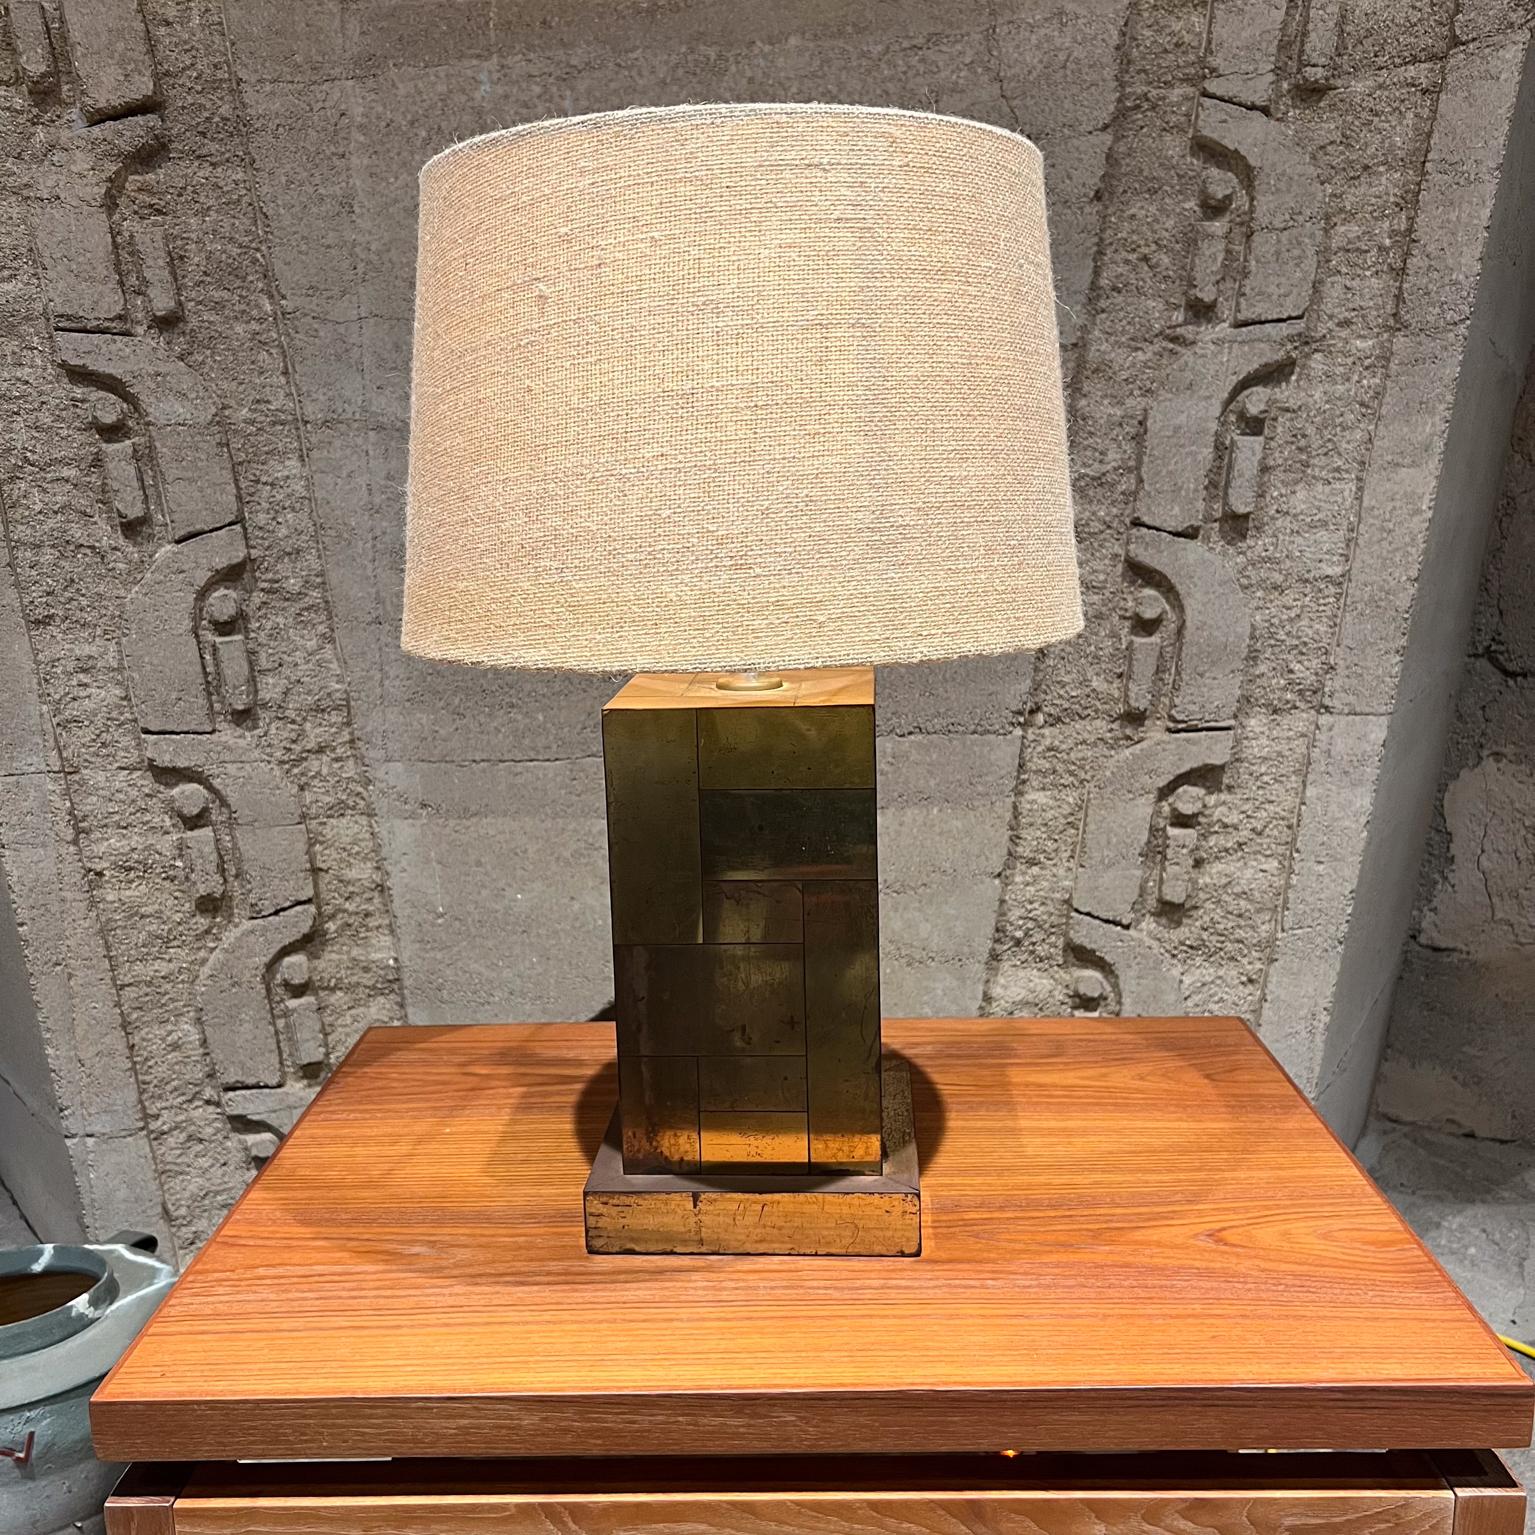 
1970s Cityscape Patchwork patinated Steel Column Table Lamp Style of Paul Evans
Unmarked
19 h to socket x 7.5 x 7.5
Rewired new socket, plug & gold twisted cord.
Preowned original fair vintage condition with signs of wear.
Patina shows. No lamp